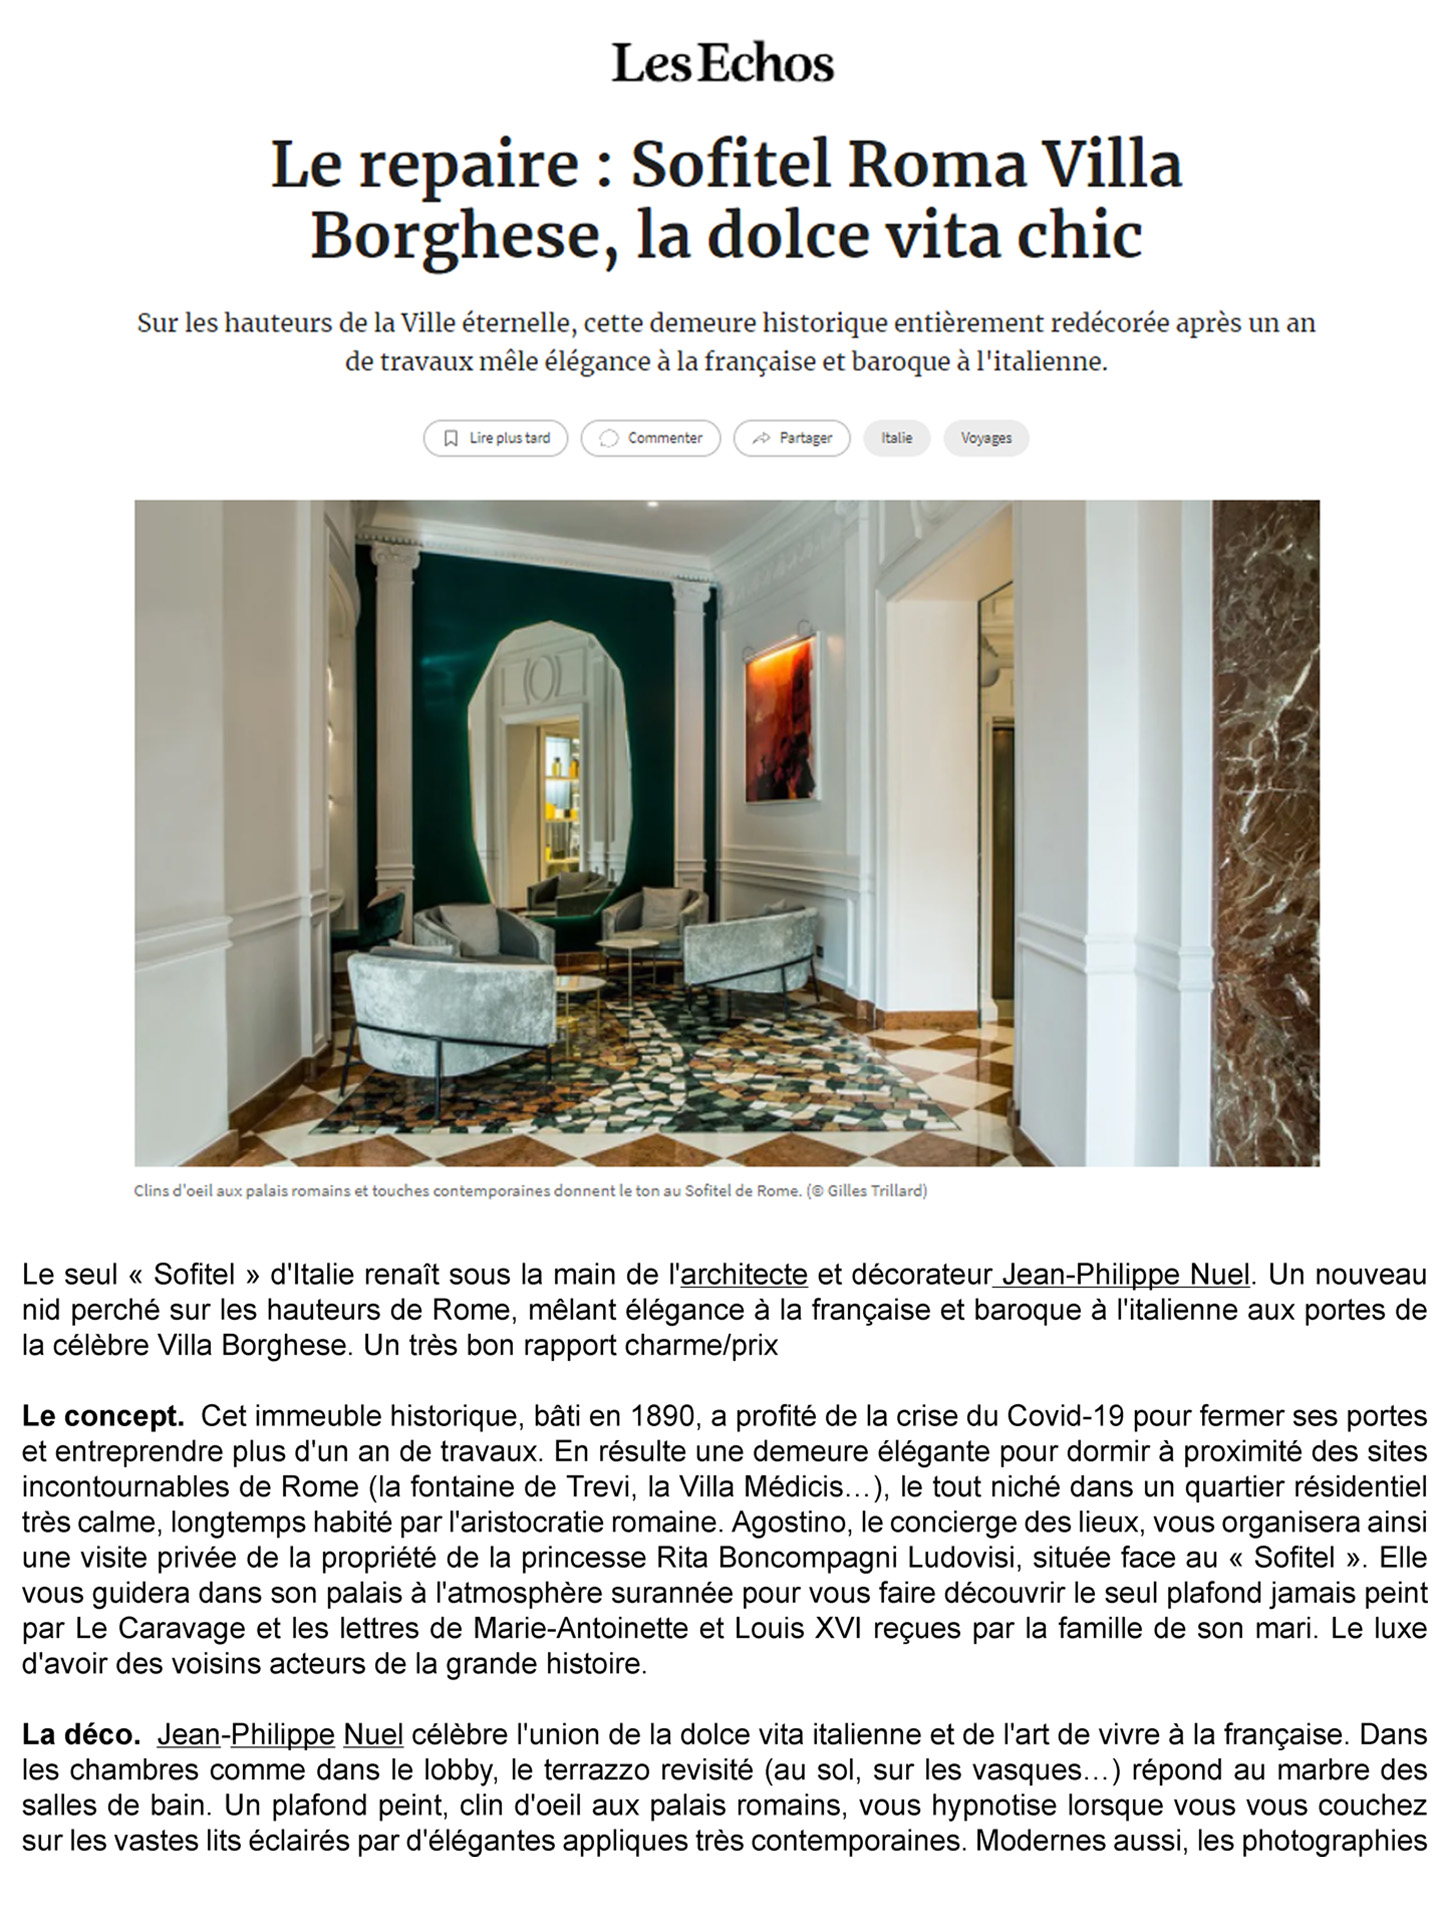 article about the sofitel rome villa borghese in the newspaper les echos, luxury hotel in italy designed by the french studio jean-philippe nuel